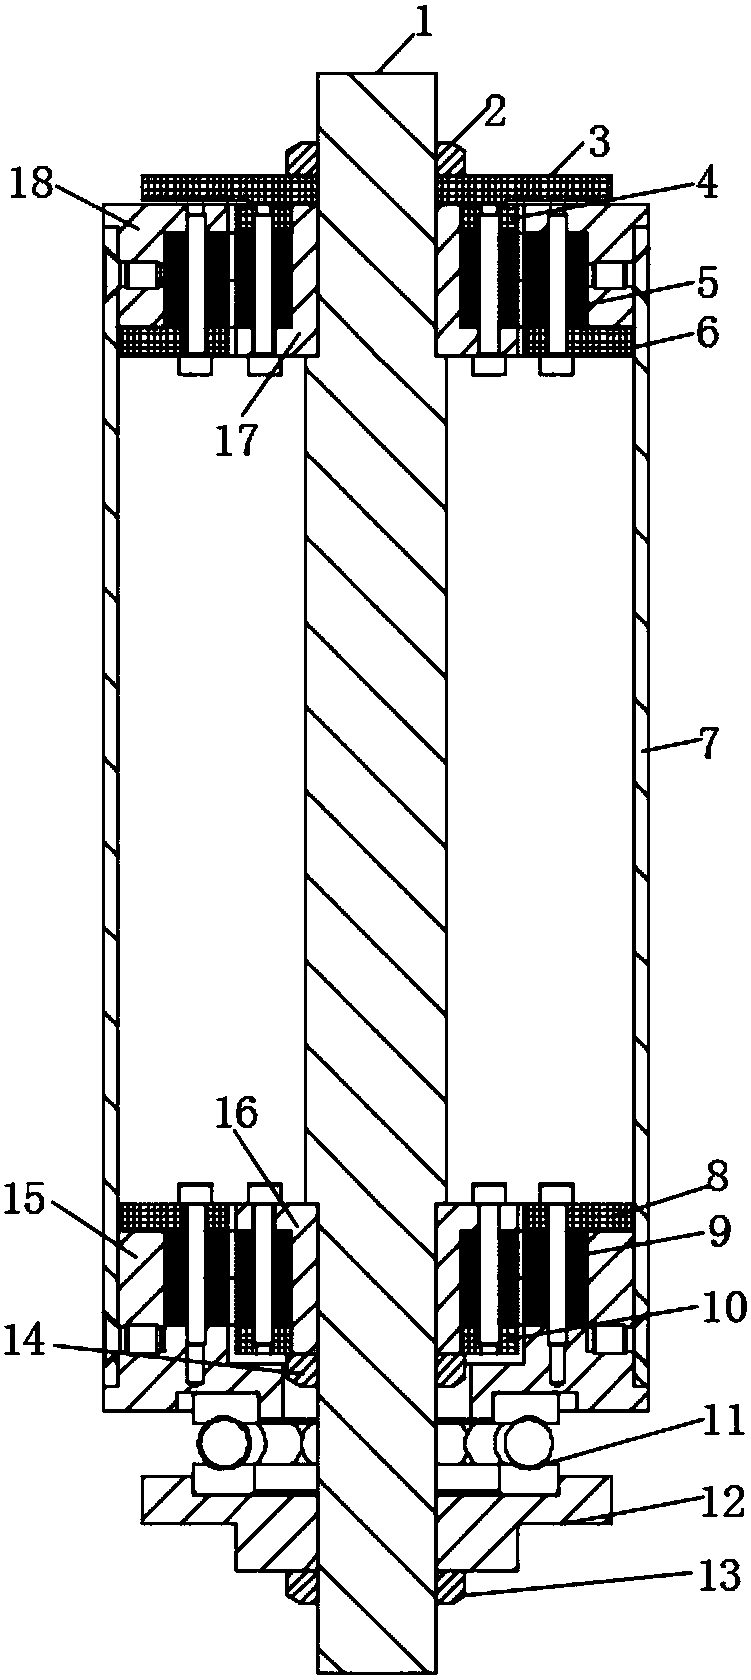 Four-degree-of-freedom magnetic suspension rotating cylinder